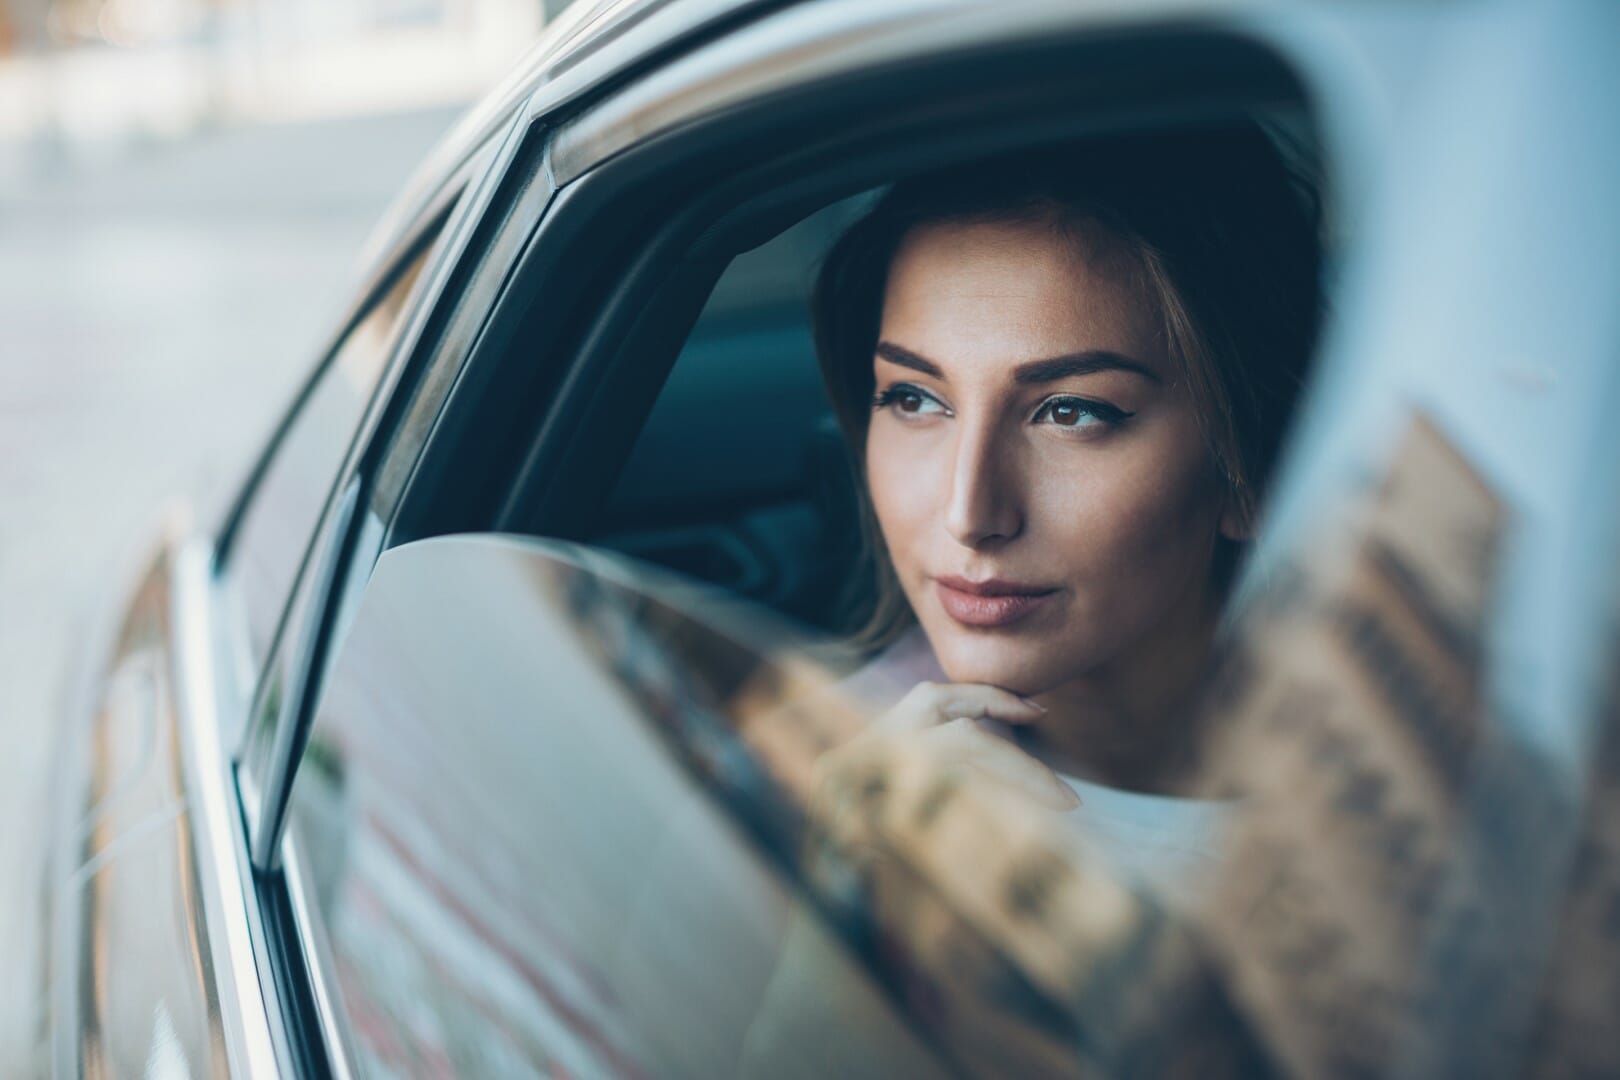 Why Women Should Think Twice About Using Ridesharing Services